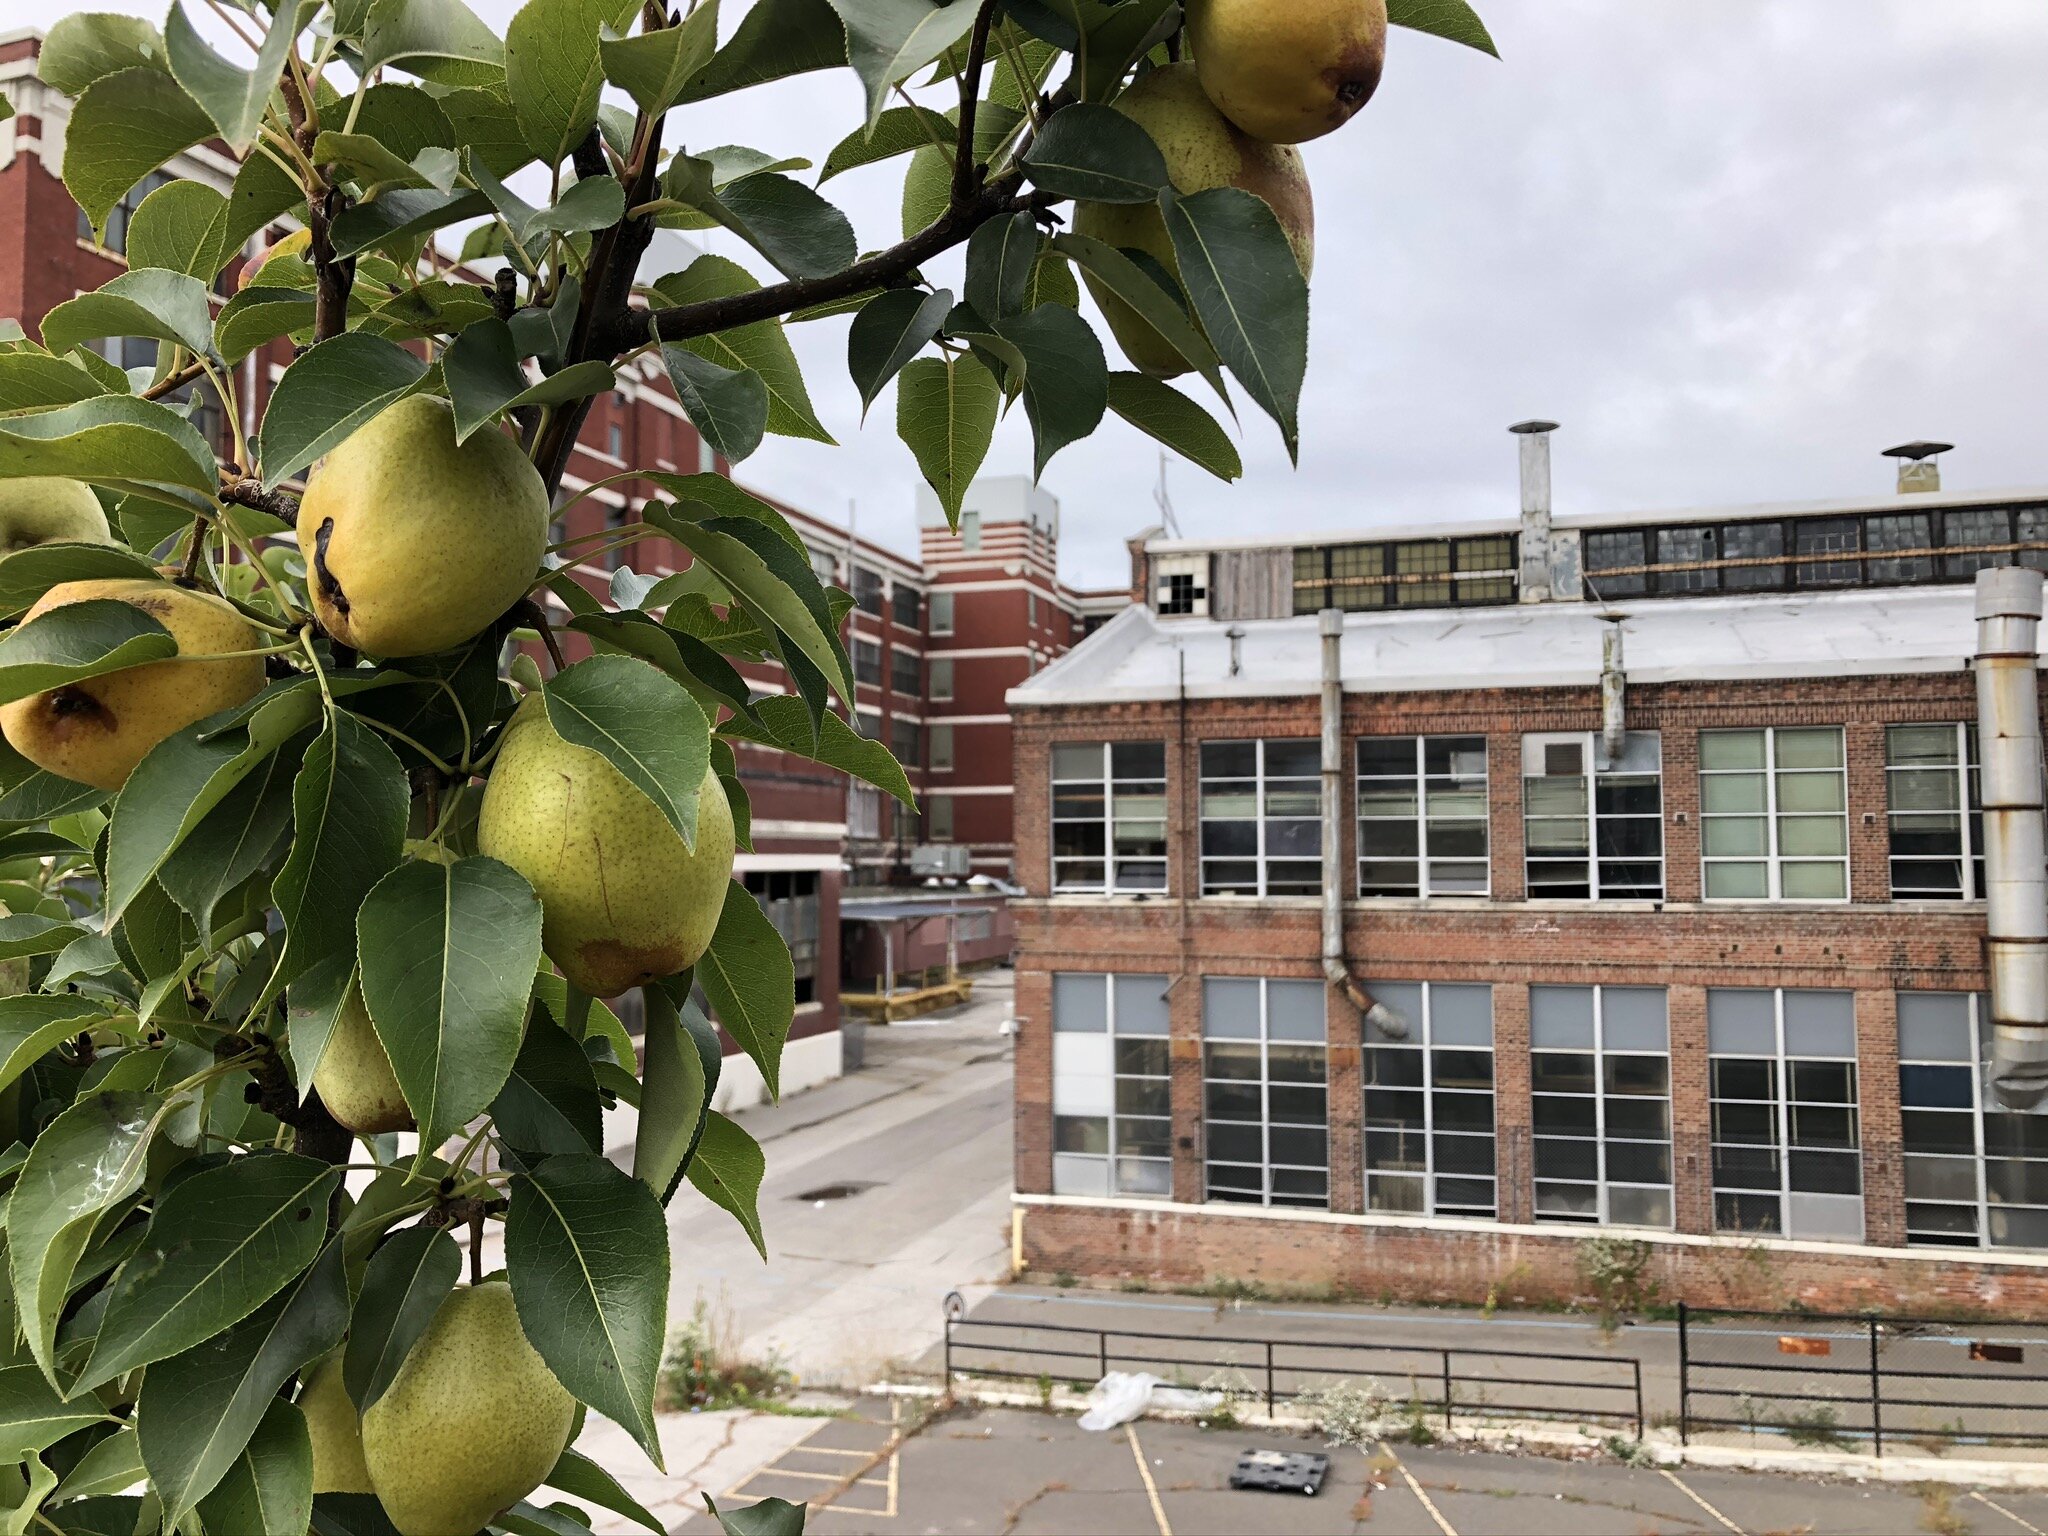 The pear tree on the former GE campus plays a special role in many ex-employees' memories.